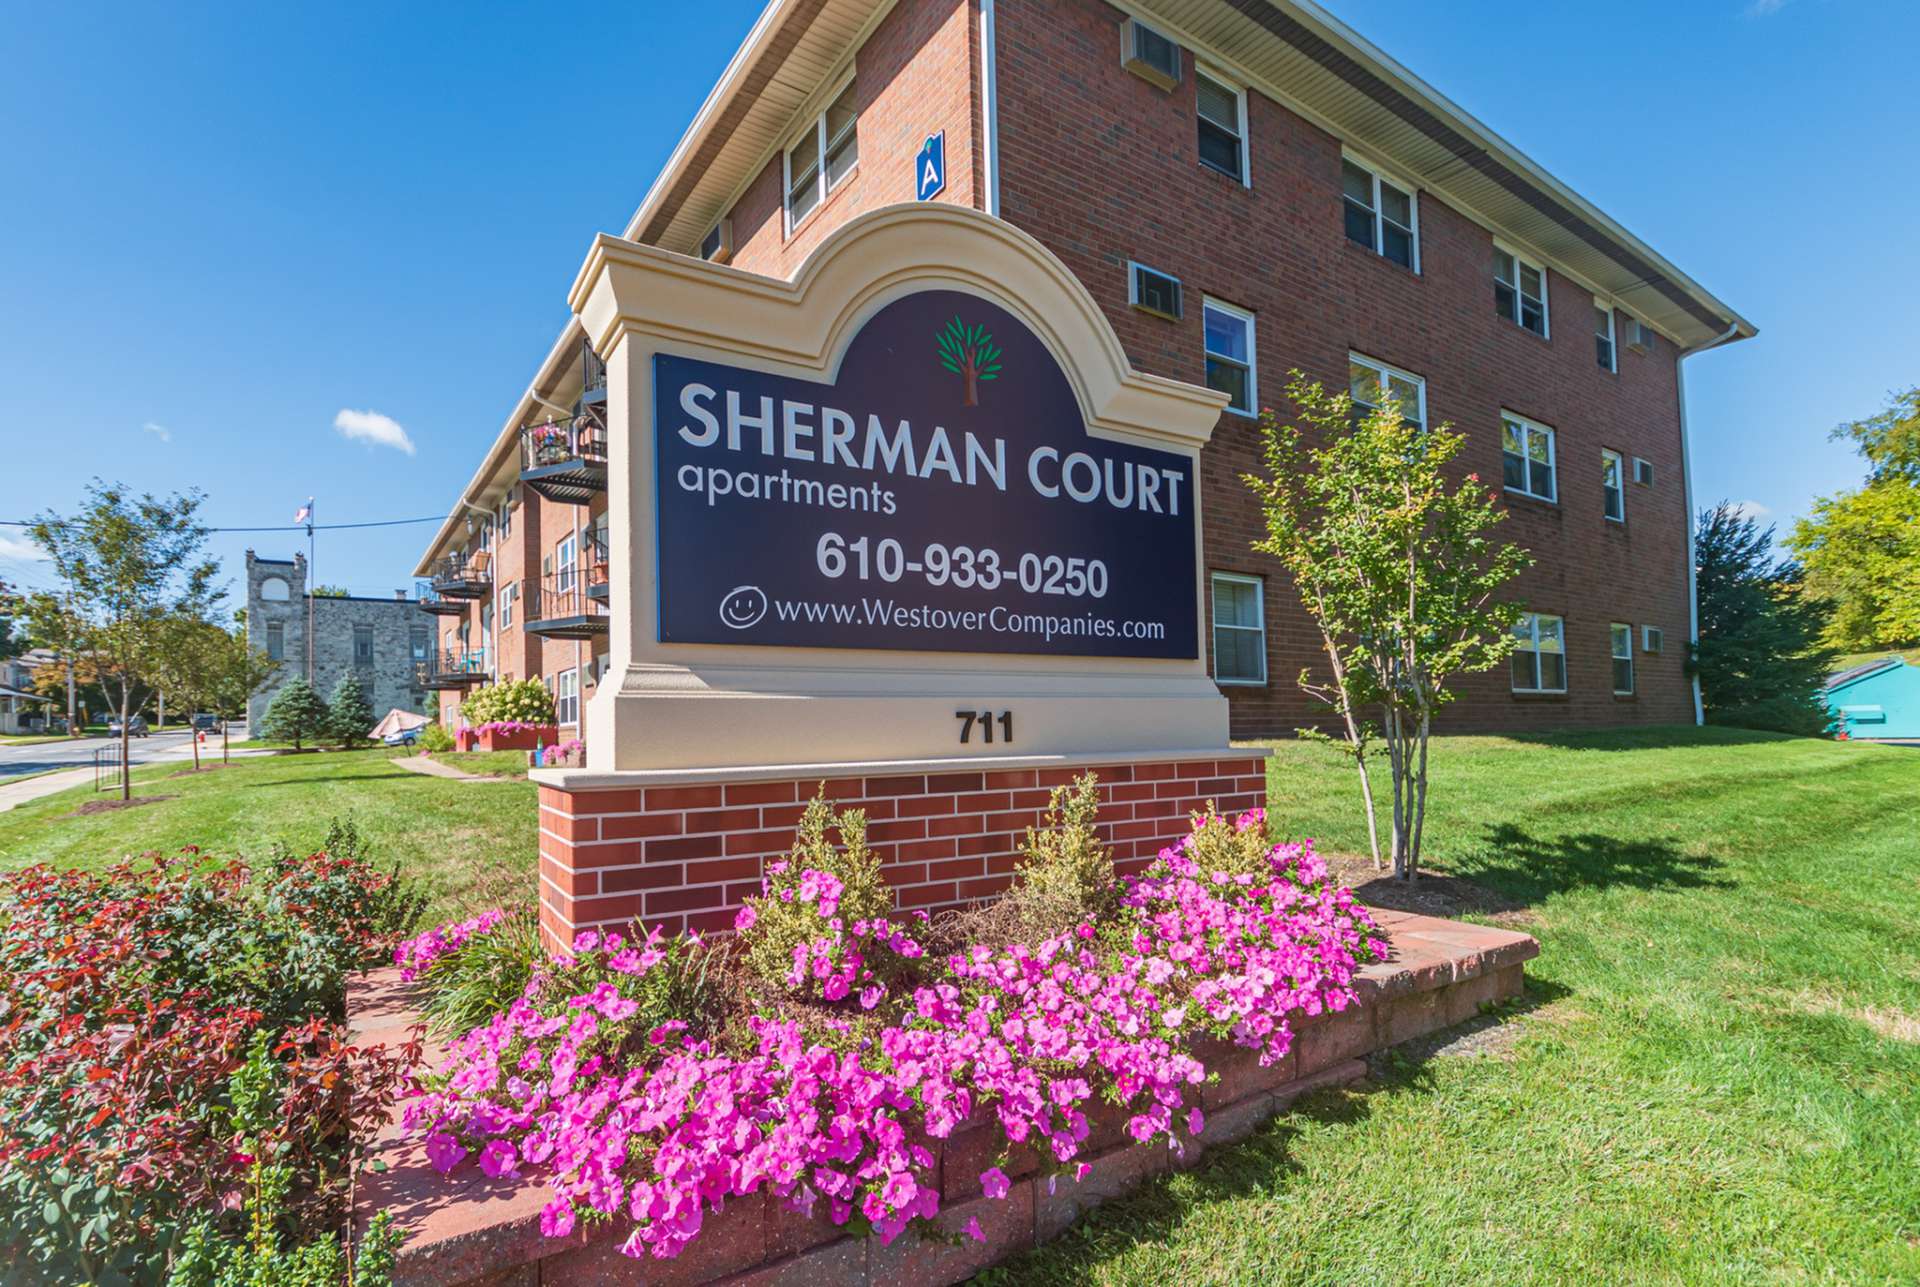 Sherman Court Apartments sign with various flowers around the sign during the daytime.